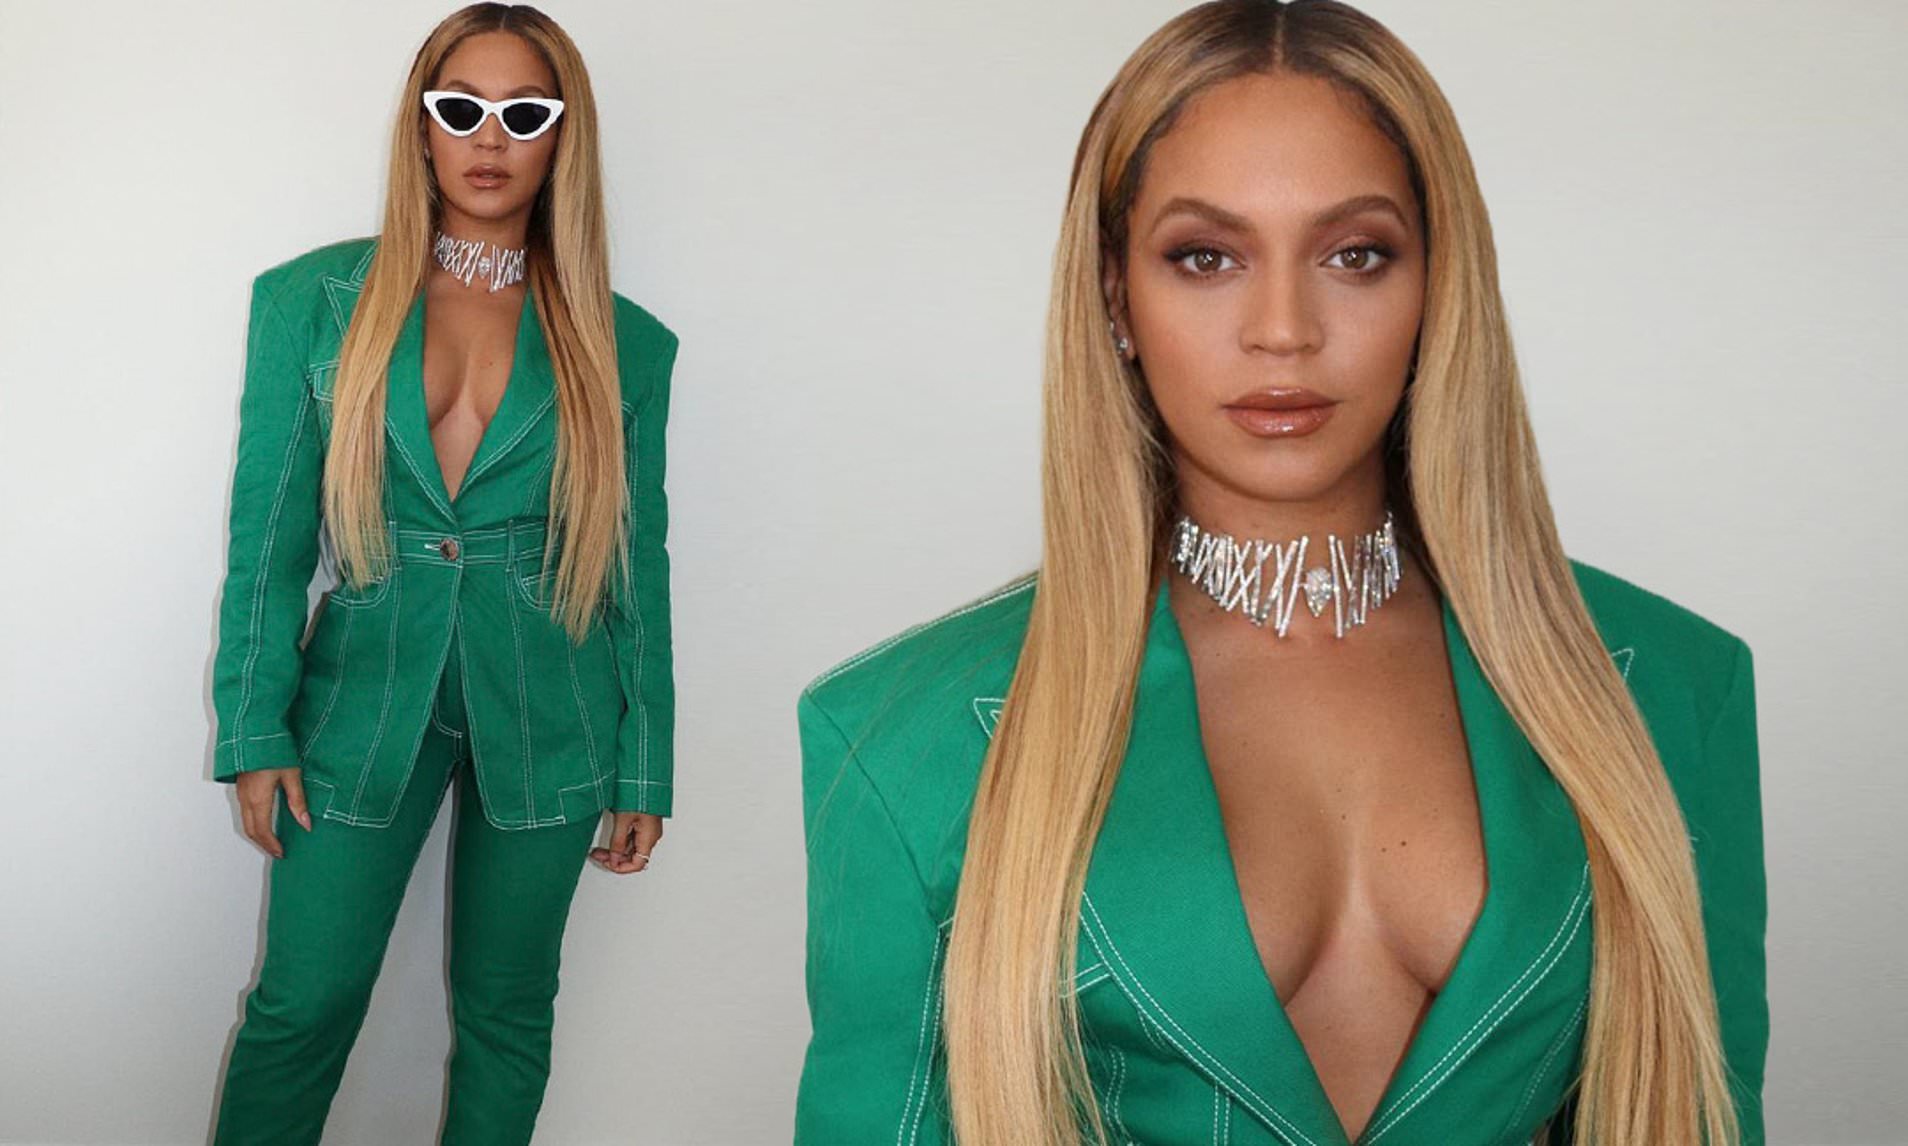 Beyonce’s fashion touchdown! Singer goes braless under green suit as she joins Jay-Z and daughter Blue Ivy at Super Bowl LIV in Miami